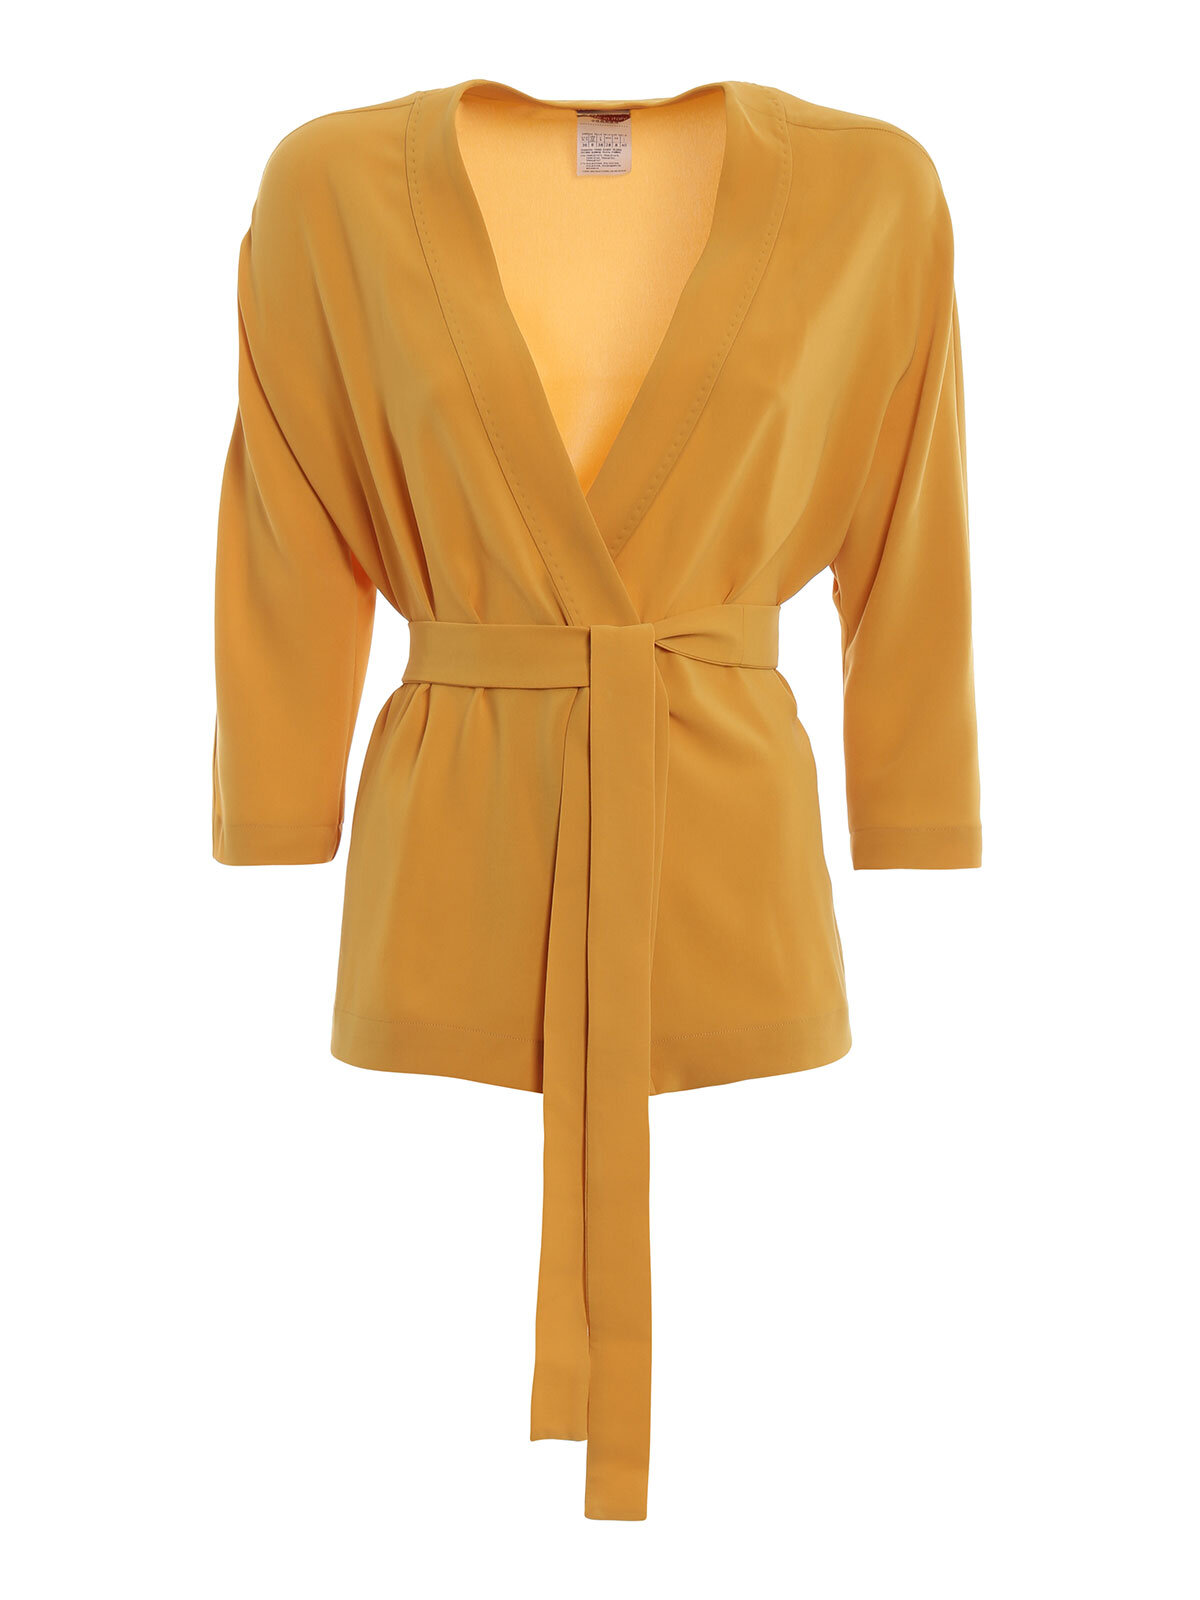 max-mara-blouses-vello-belted-fluid-cady-blouse-00000163421f00s001.jpg